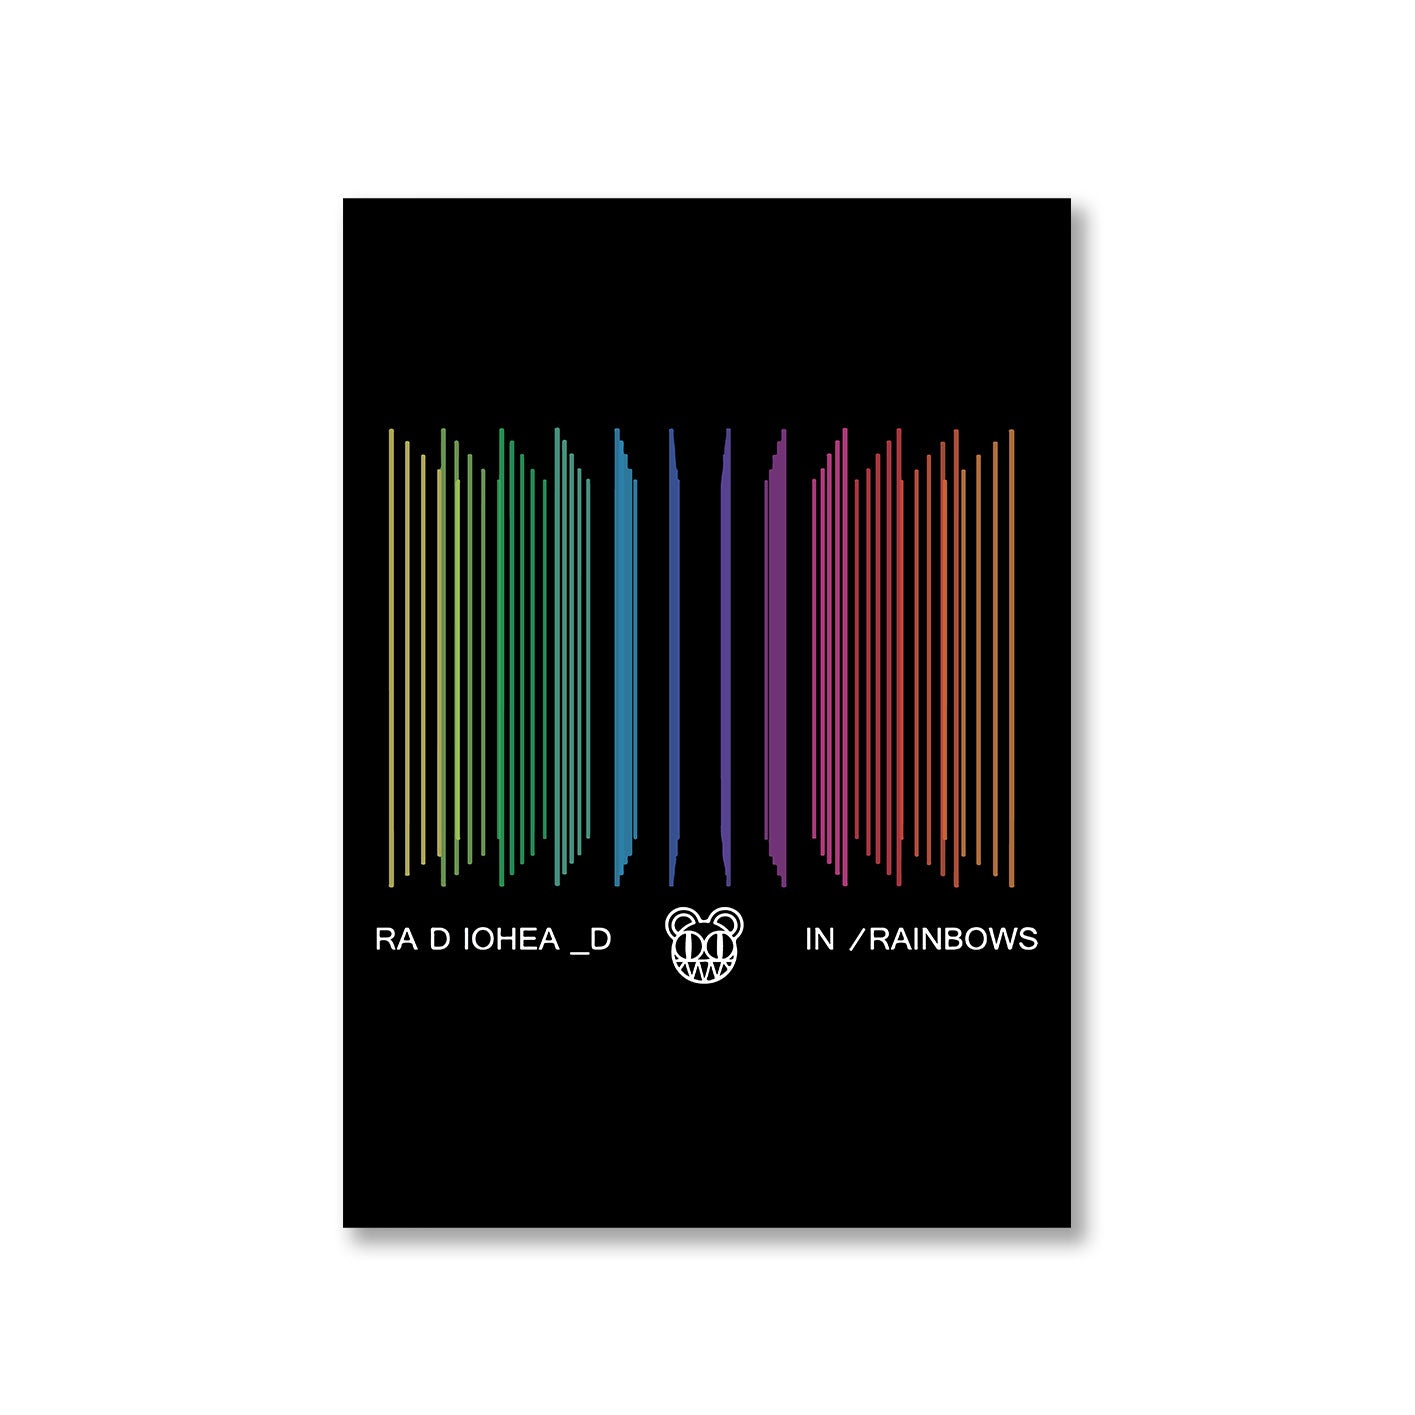 radiohead in rainbows poster wall art buy online united states of america usa the banyan tee tbt a4